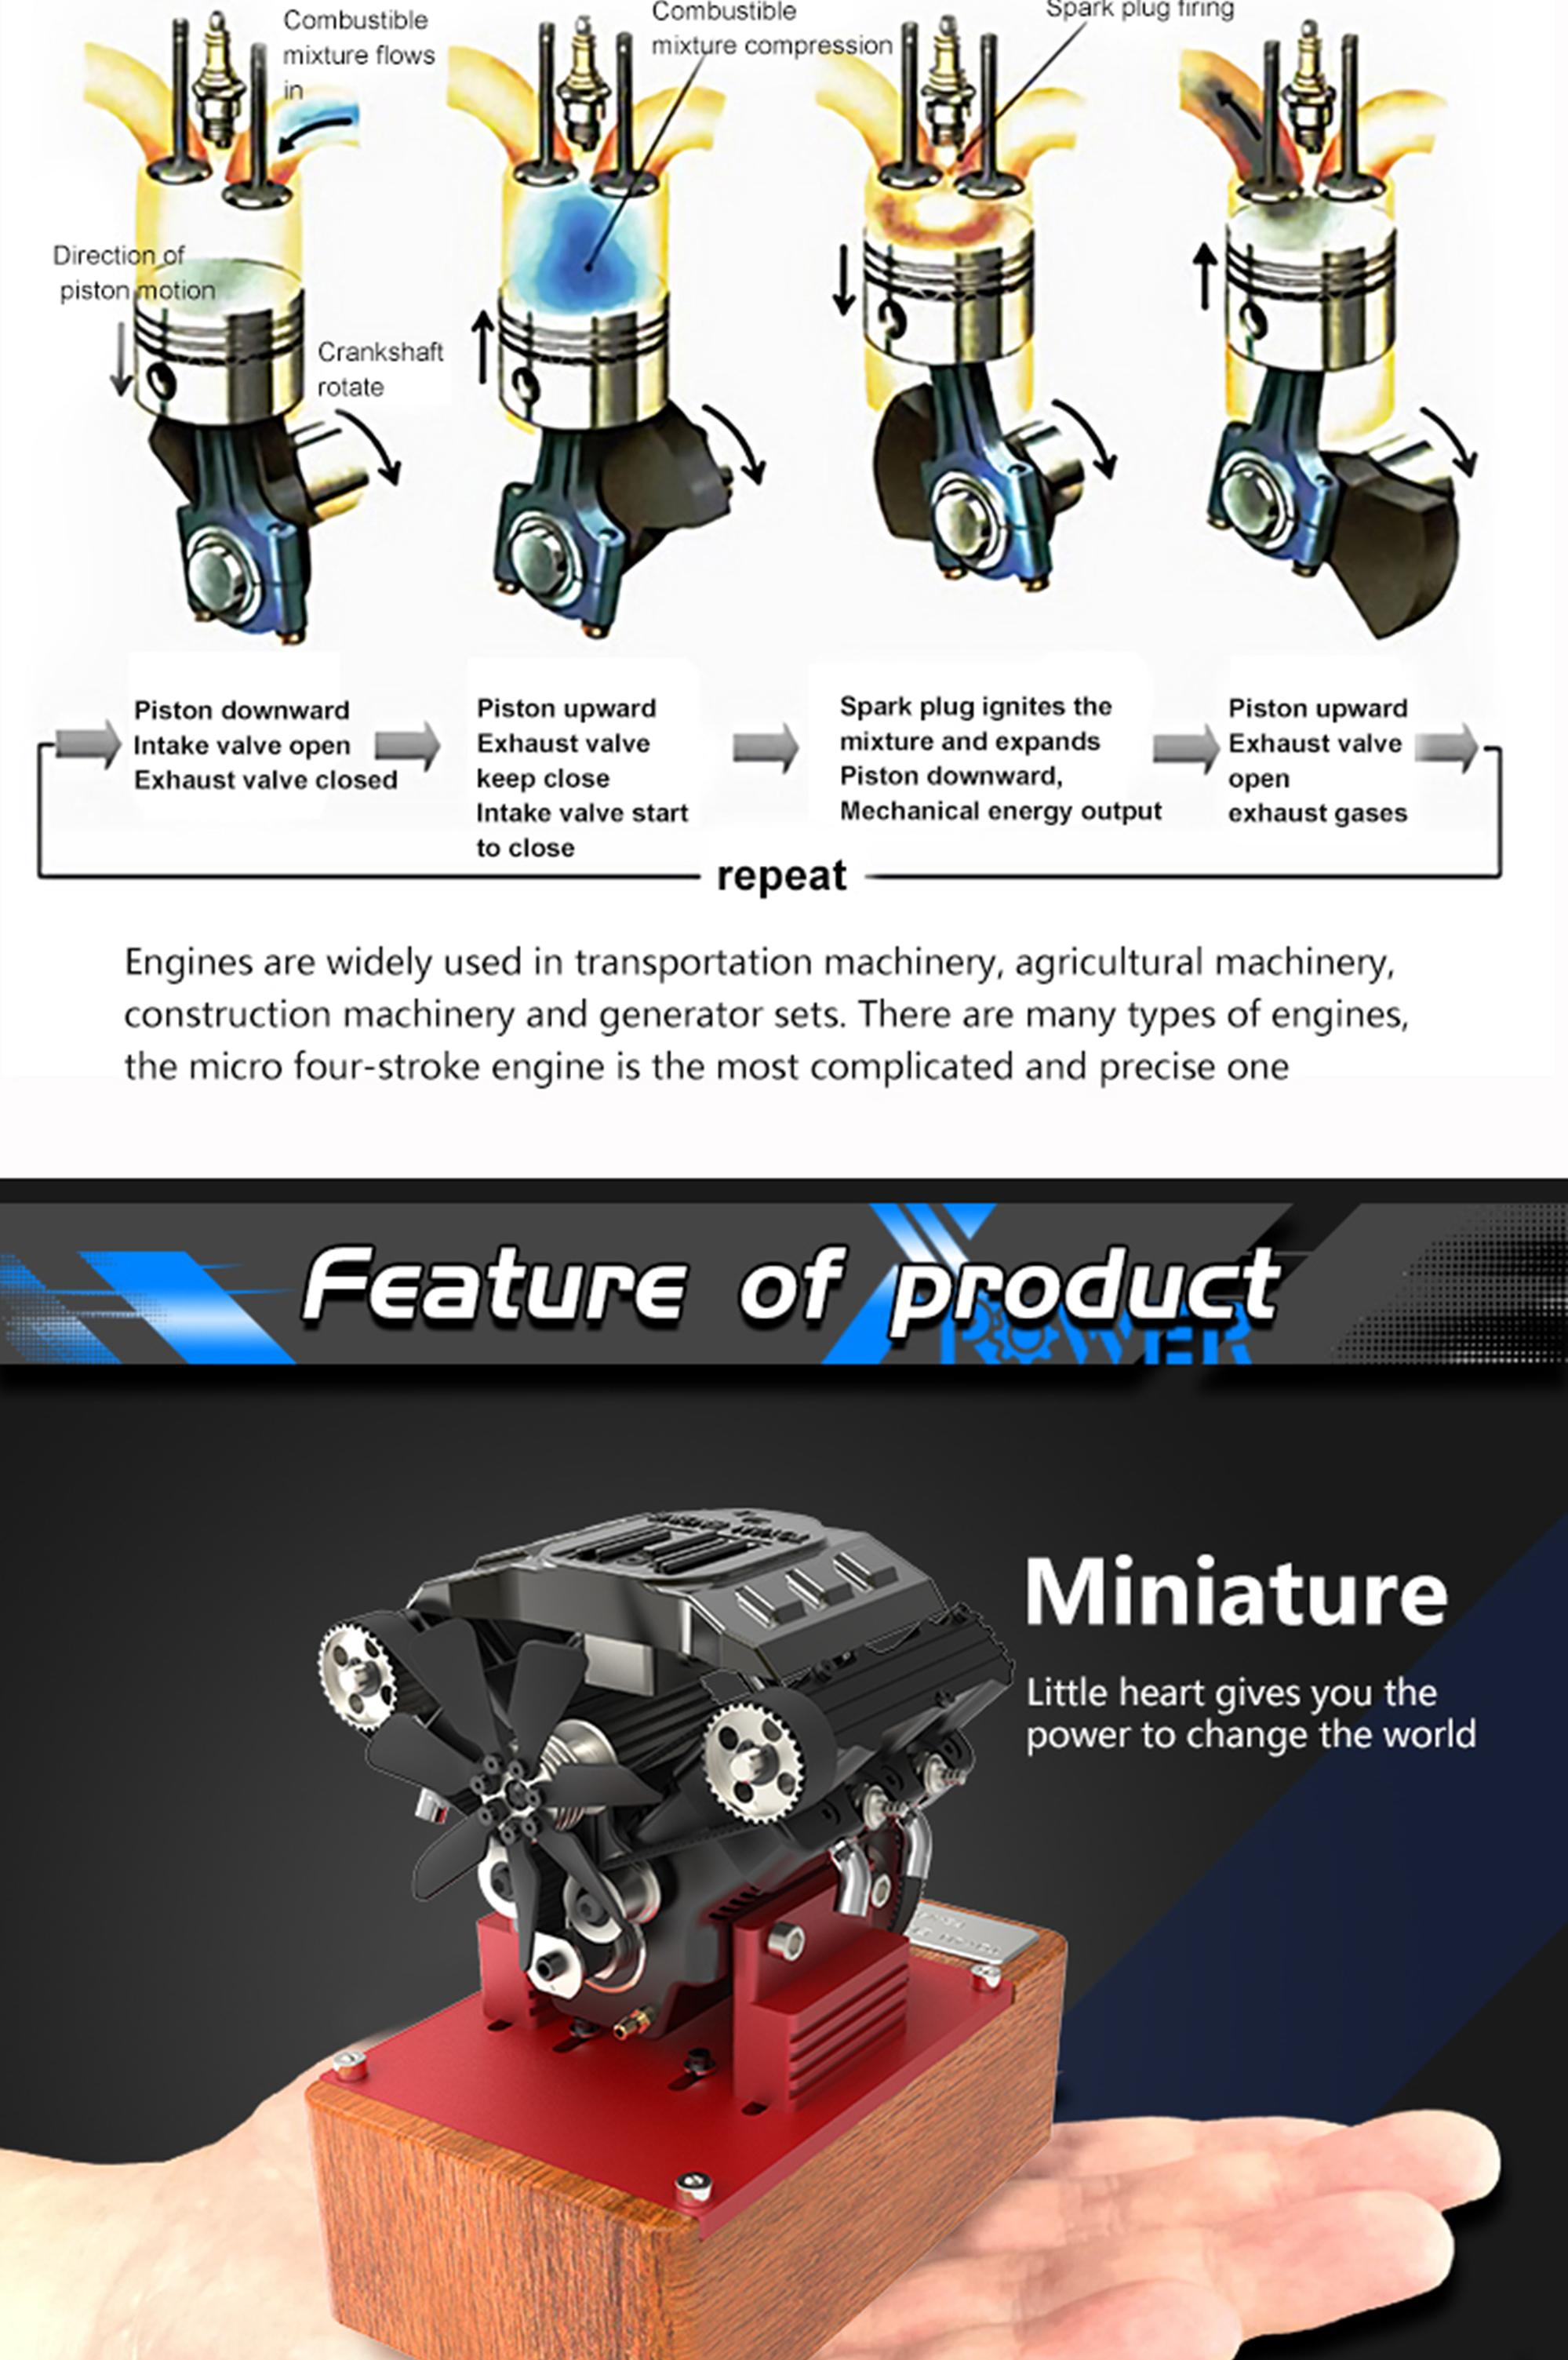 Mini Rc Engine: Features and Power Sources of Mini RC Engines